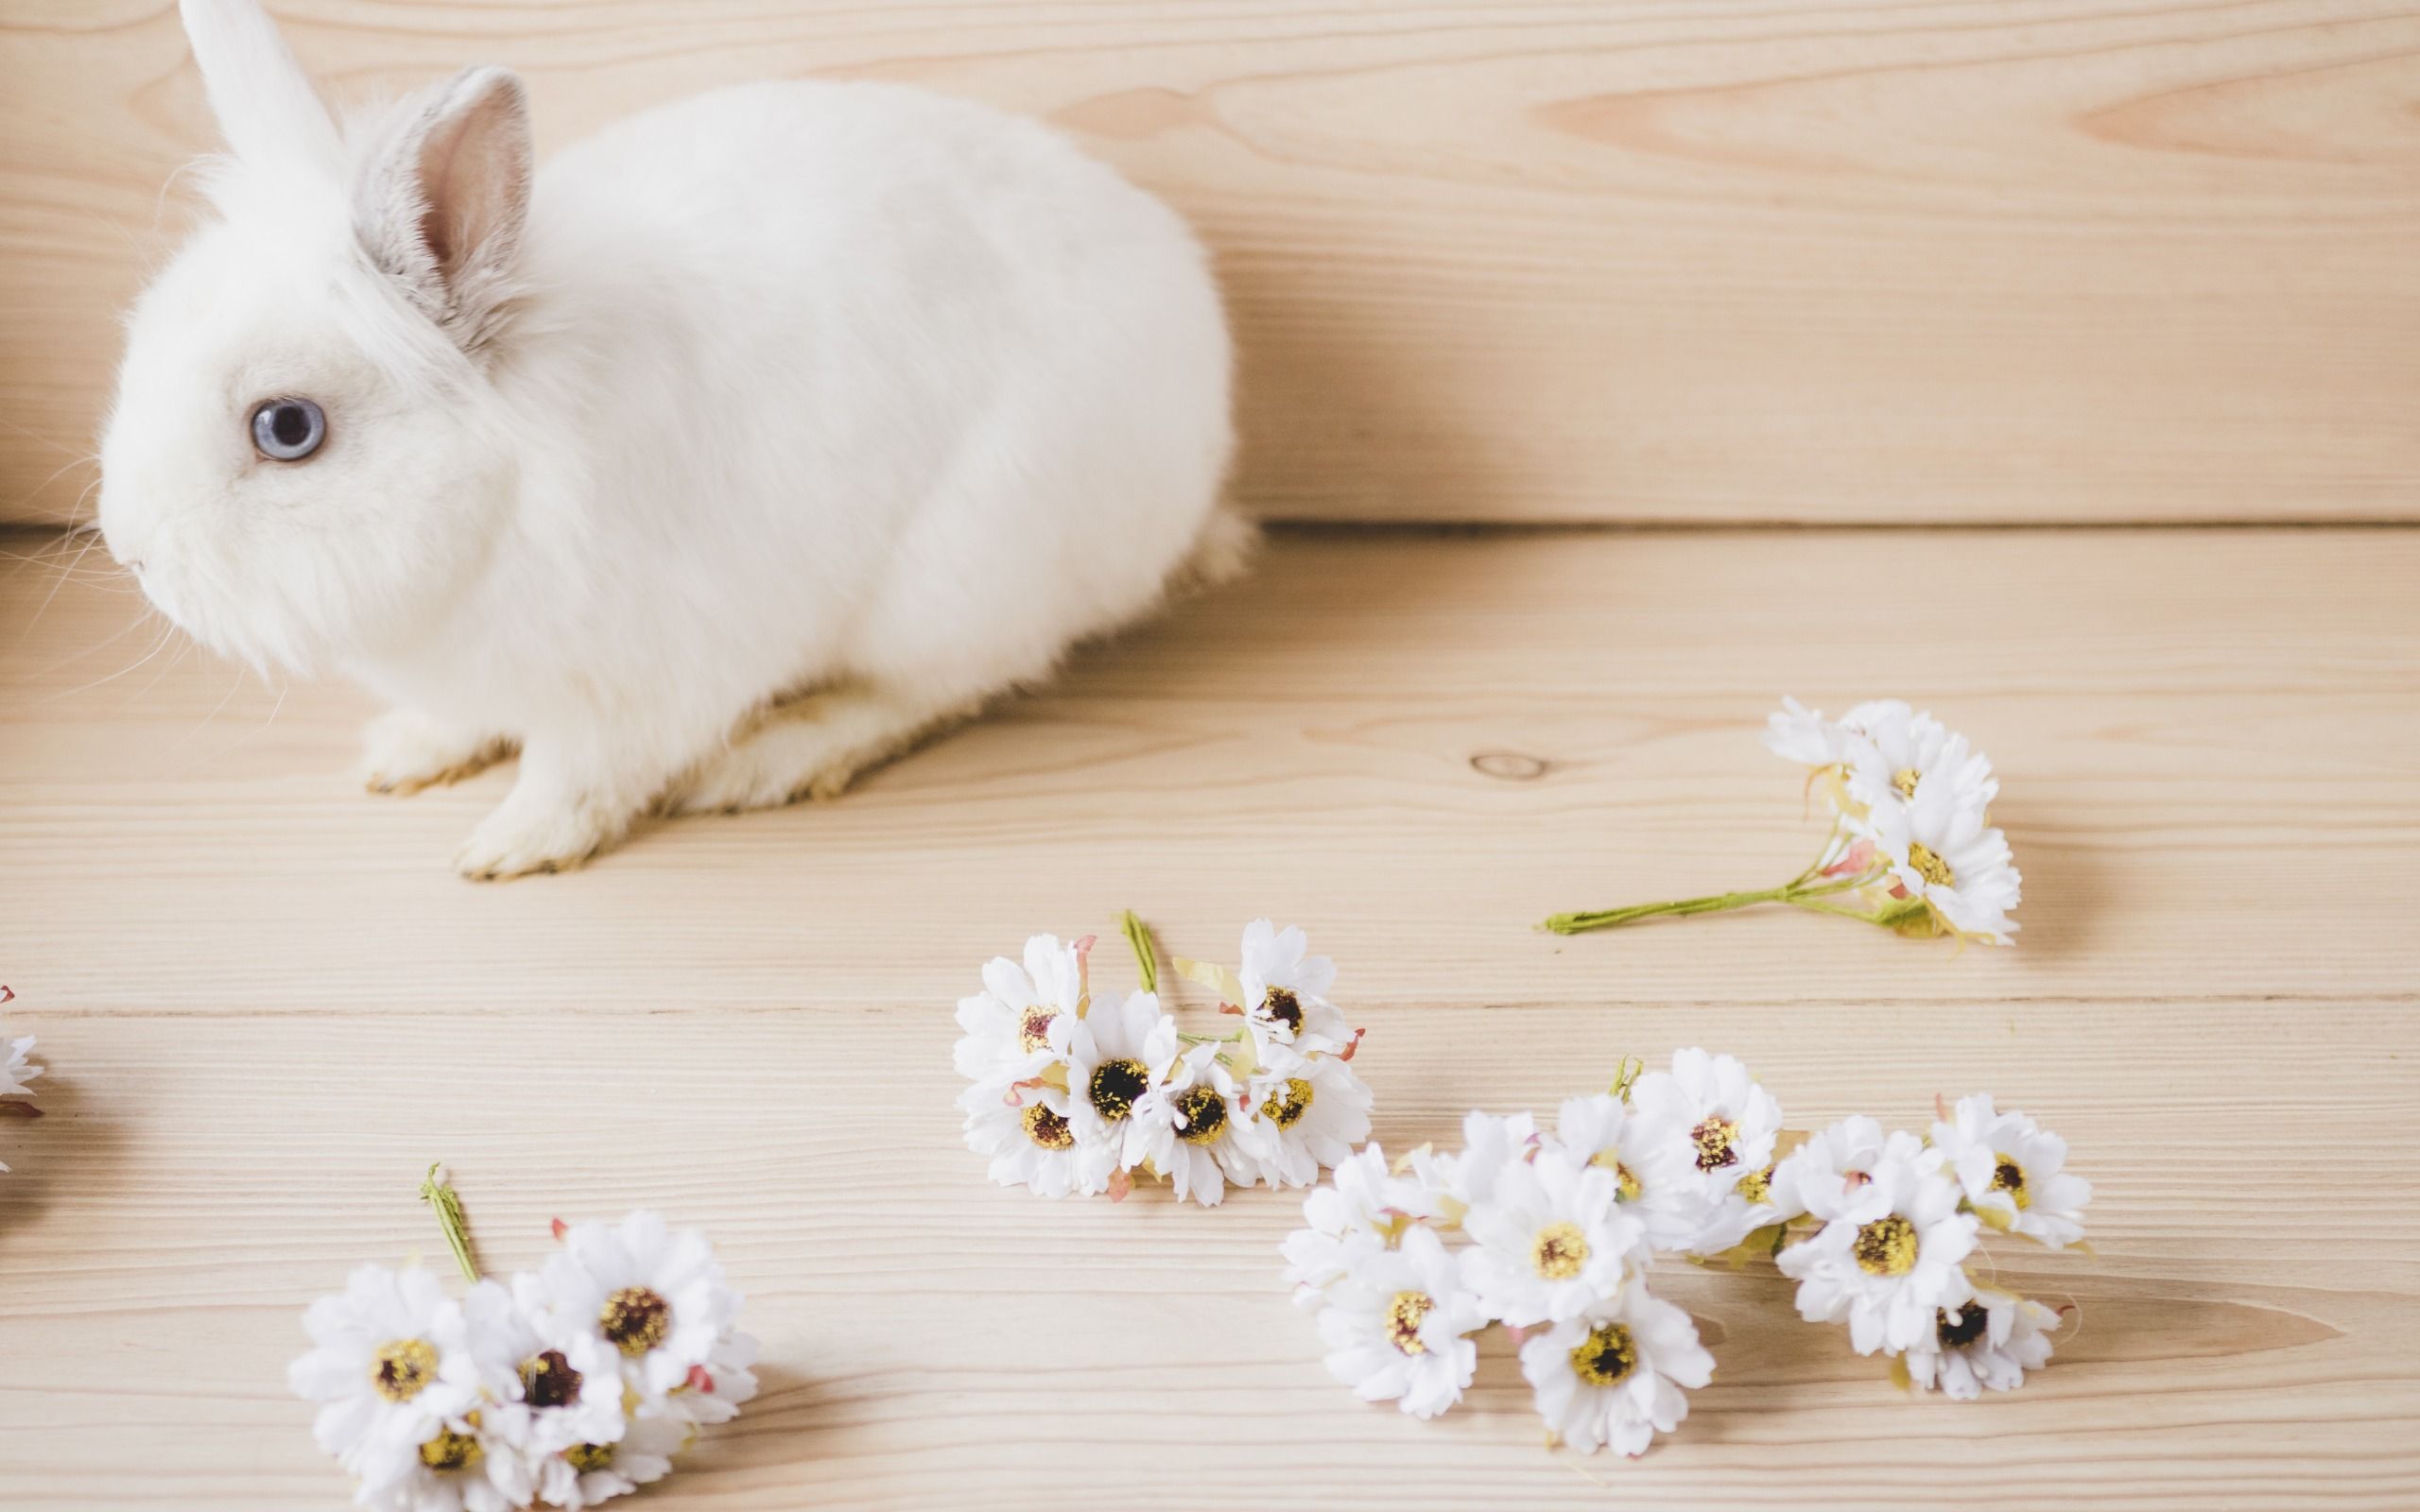 Download wallpaper White little rabbit, cute animals, spring flowers, light wood, fluffy bunny for desktop with resolution 2560x1600. High Quality HD picture wallpaper